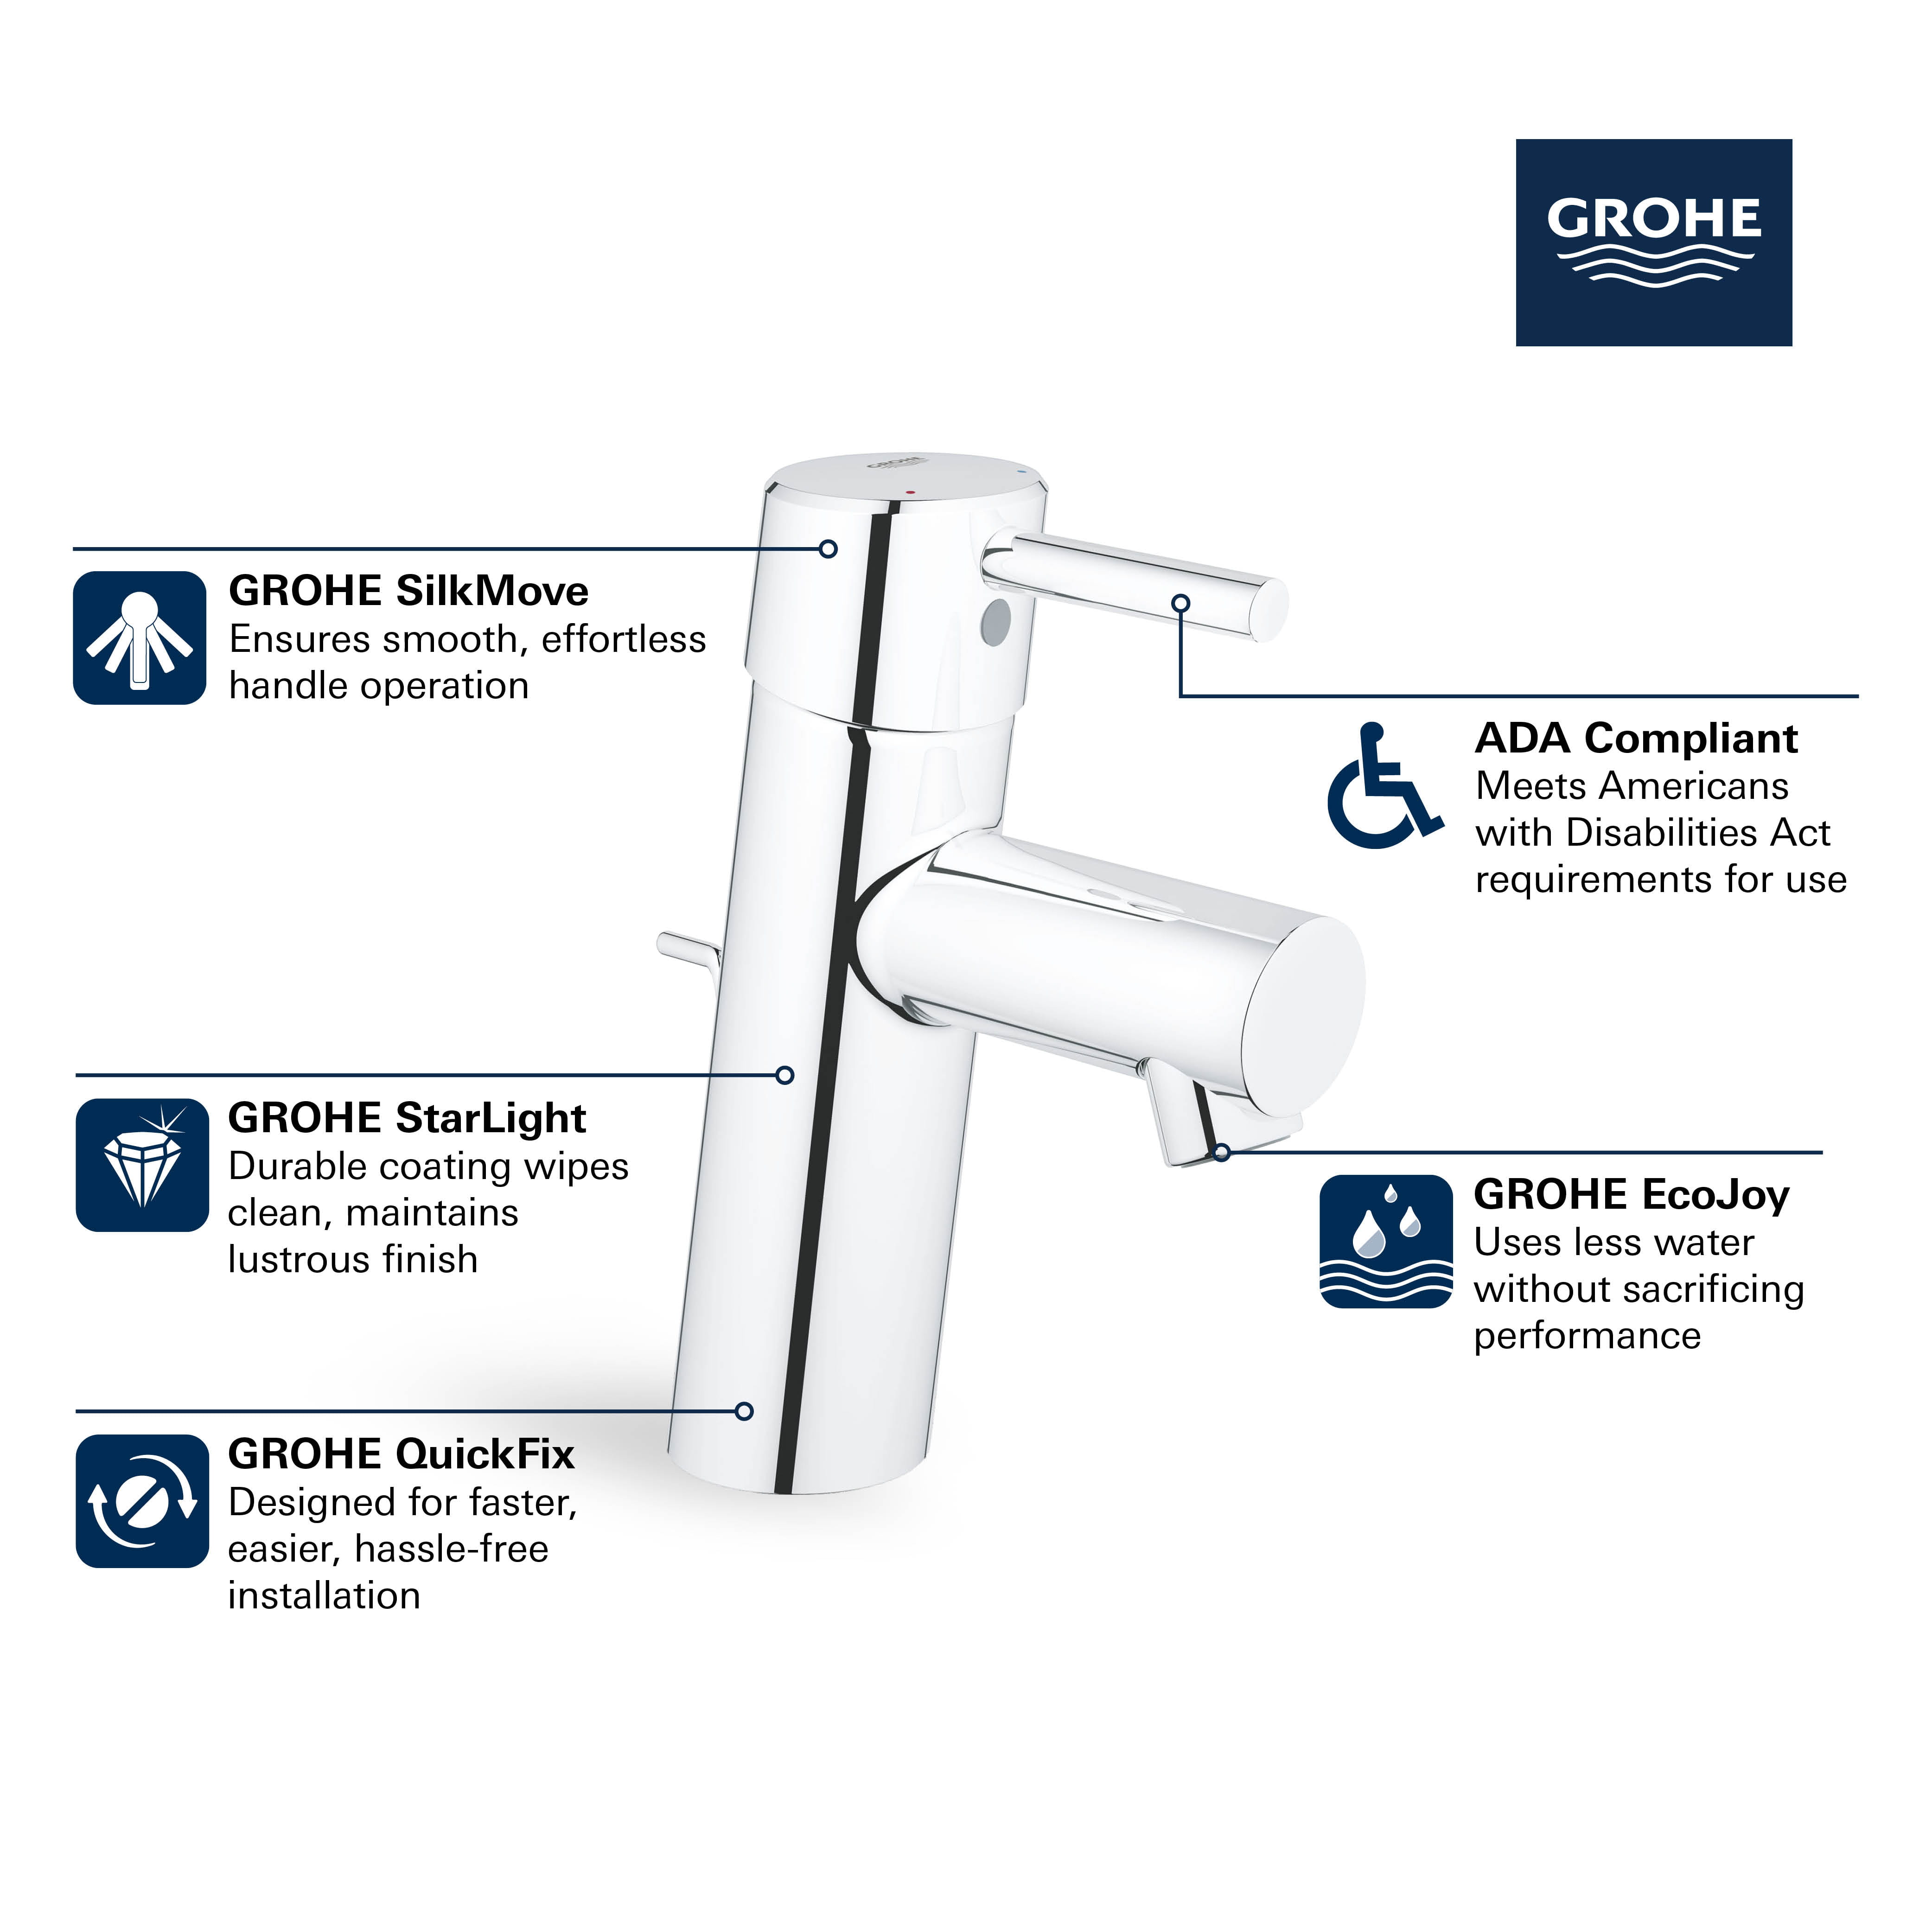 1.2 GPM Grohe 34271ENA Concetto S-Size Single-Handle Single-Hole Bathroom Faucet Without Pop-Up